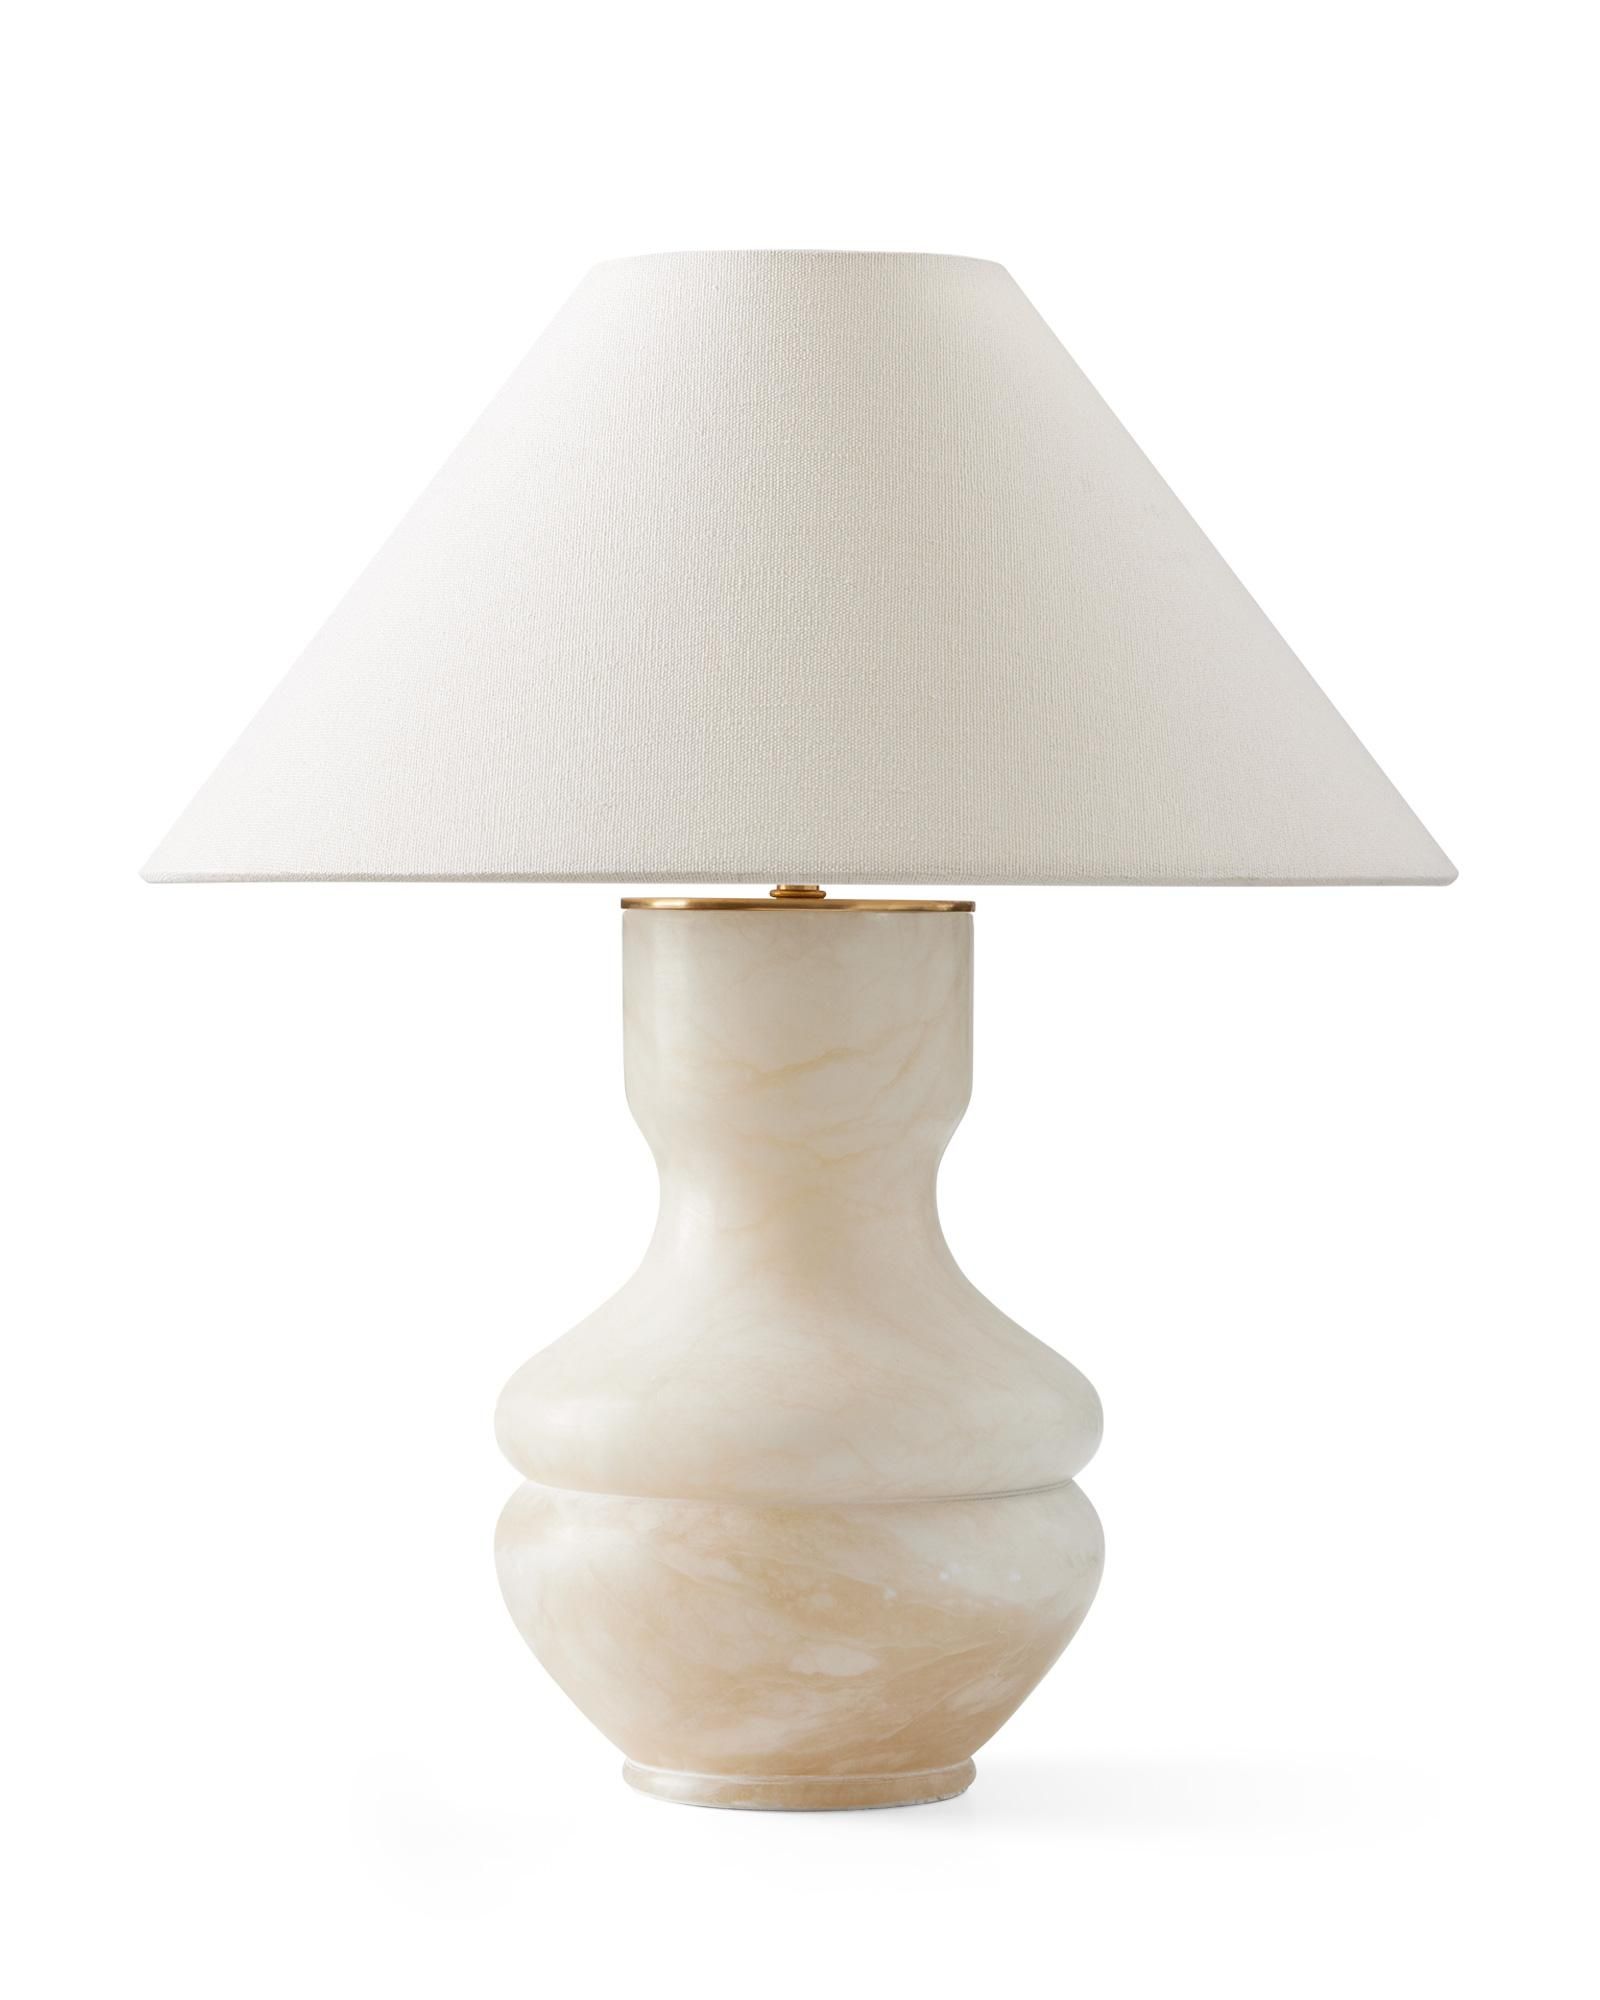 Mayfair Table Lamp | Serena and Lily